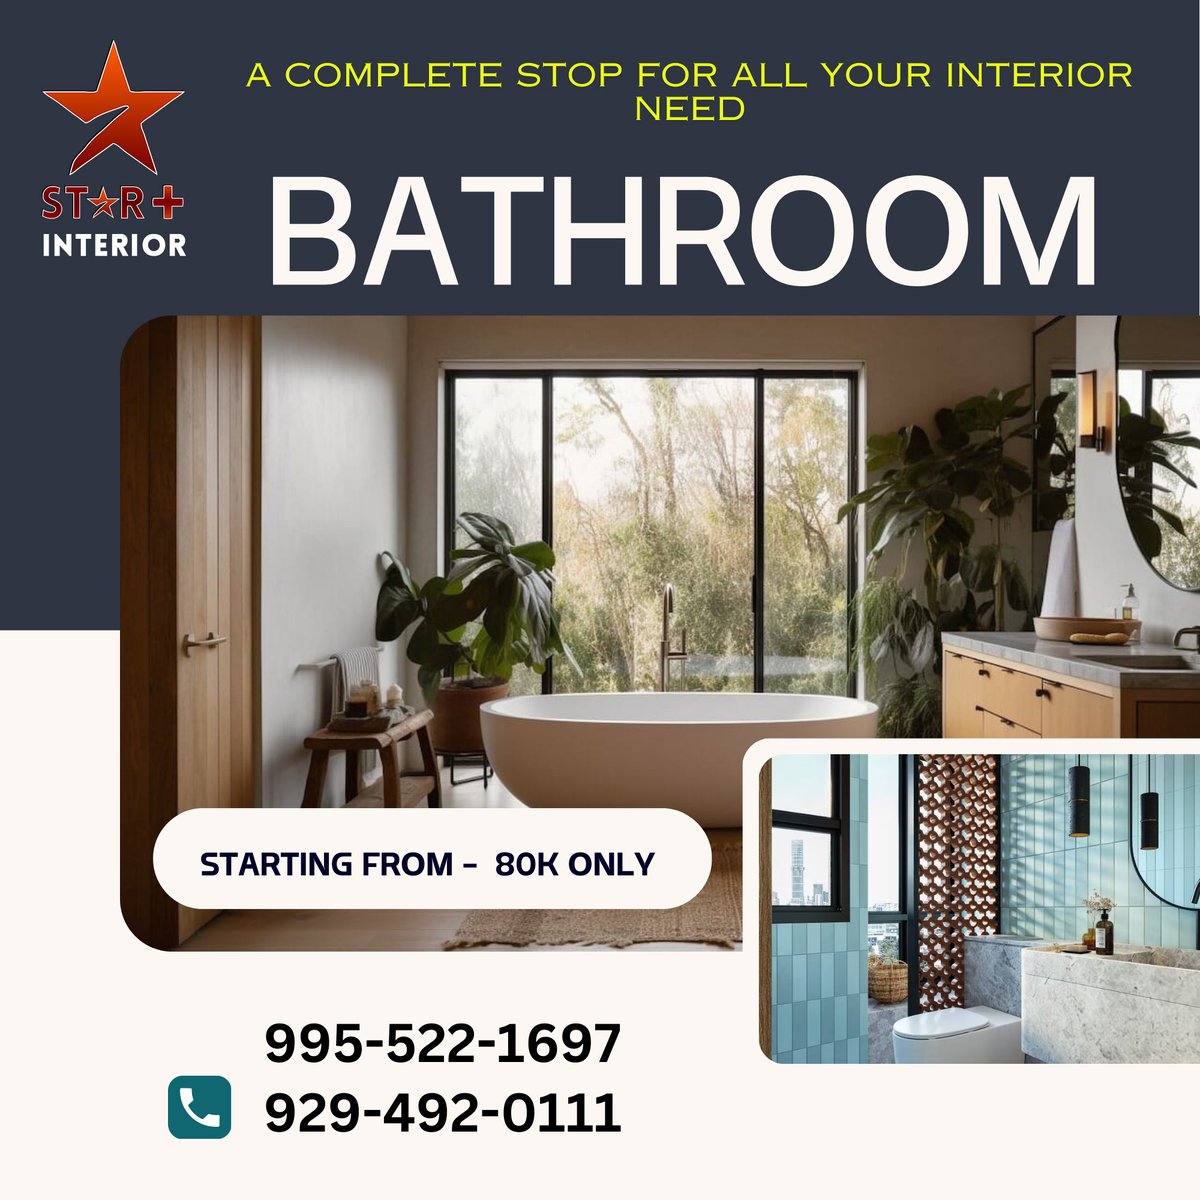 Star Plus Interior designs your bathroom Interior and gives you star finish. Contact now and book your appointment with us today.📷

#interiordesigntrends #interiordecorating #interiordesigner #architecturedesign #homedecorideas #homestylingideas #latestdesigns #newlook